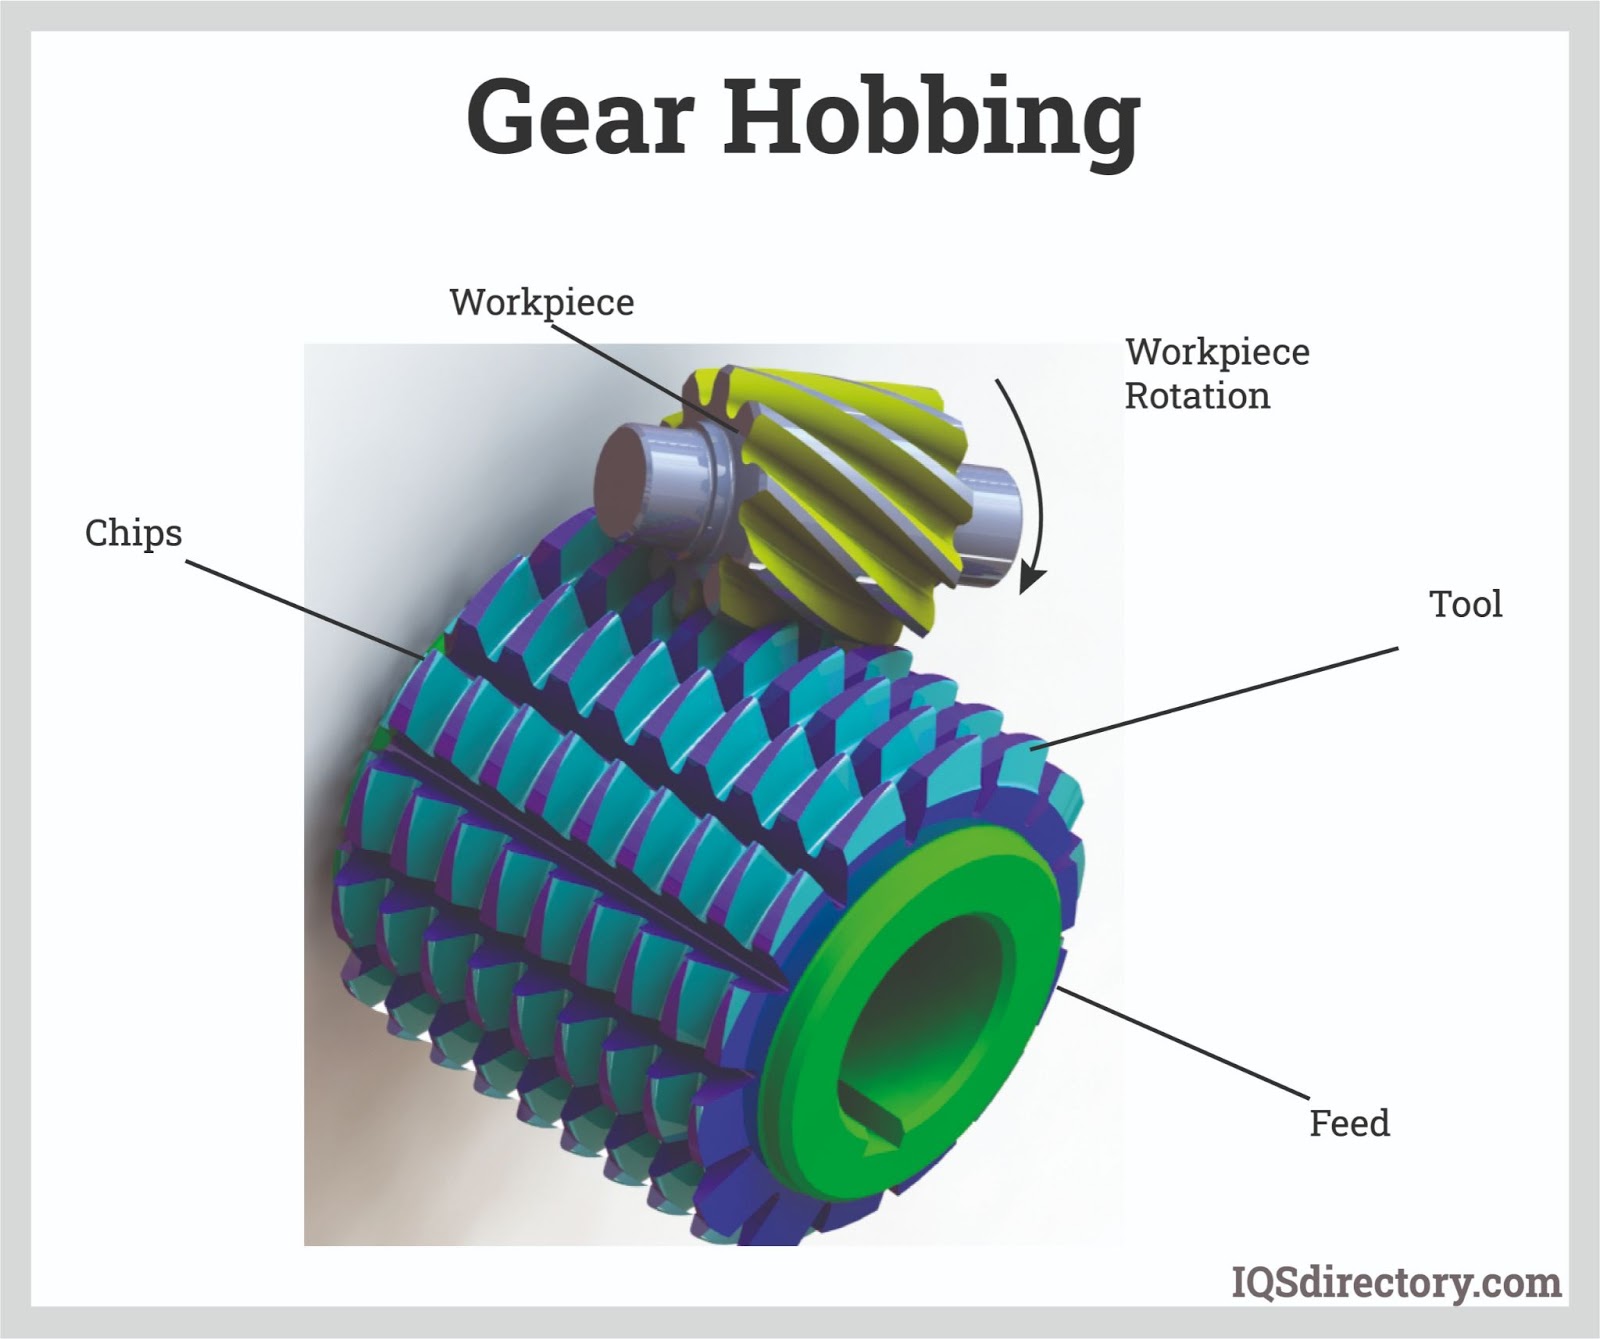 Worm Gear: What Is It? How Is it Made? Types Of, Uses